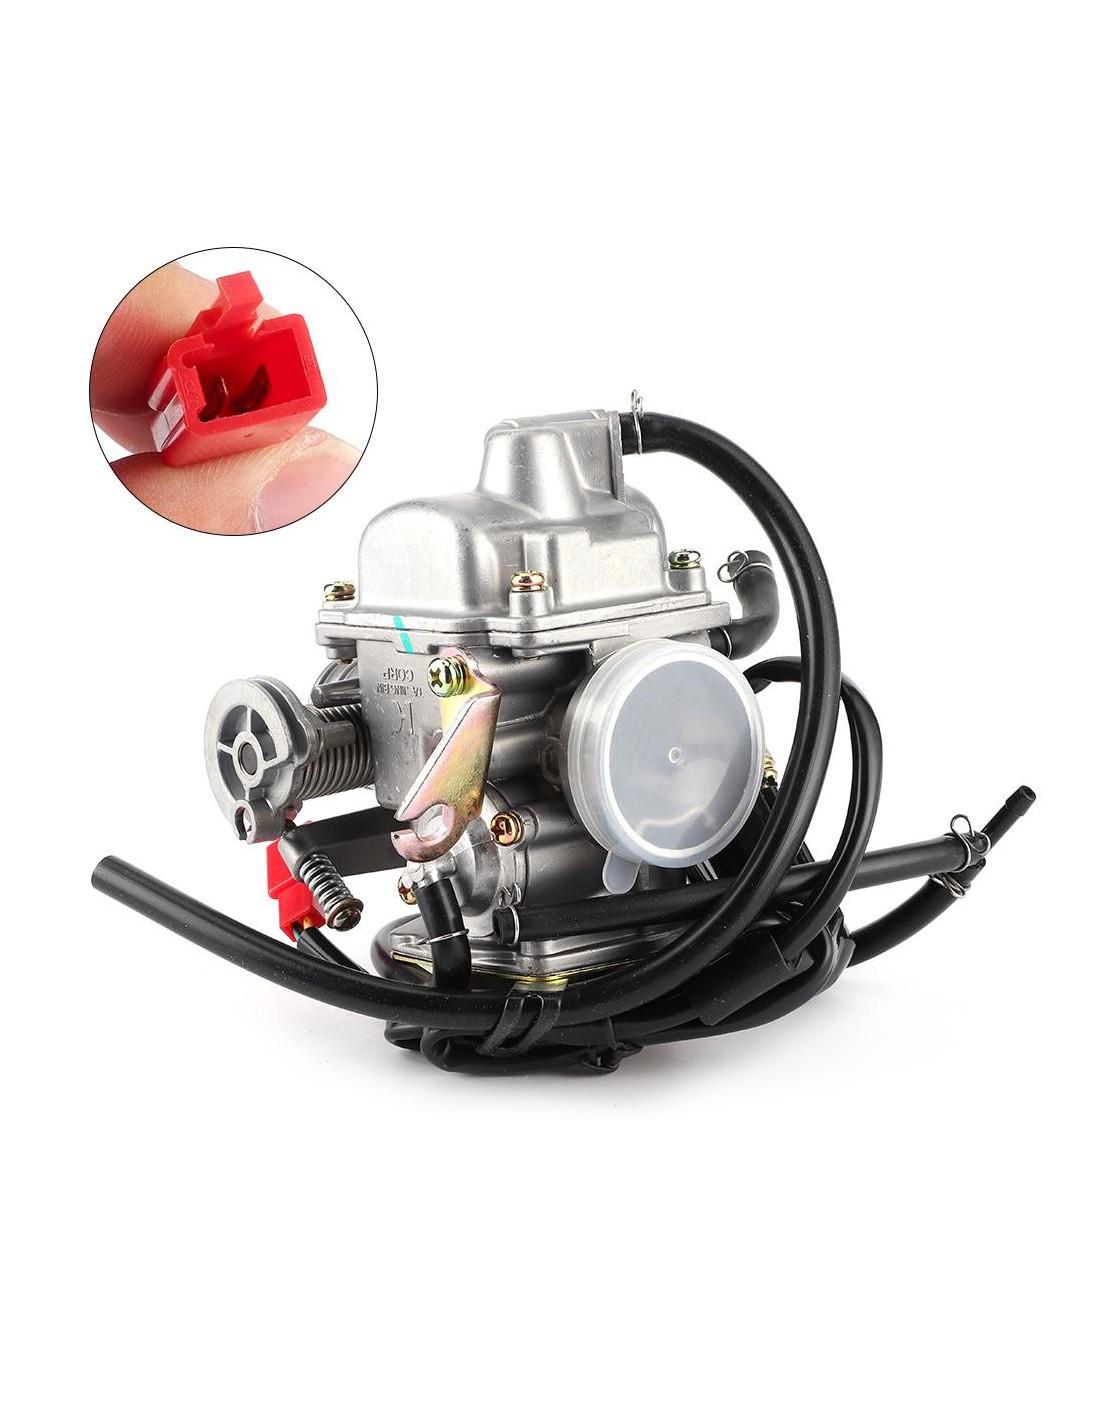 Carburateur 24 mm scooter GY6 chinois 4 temps - PitRacing